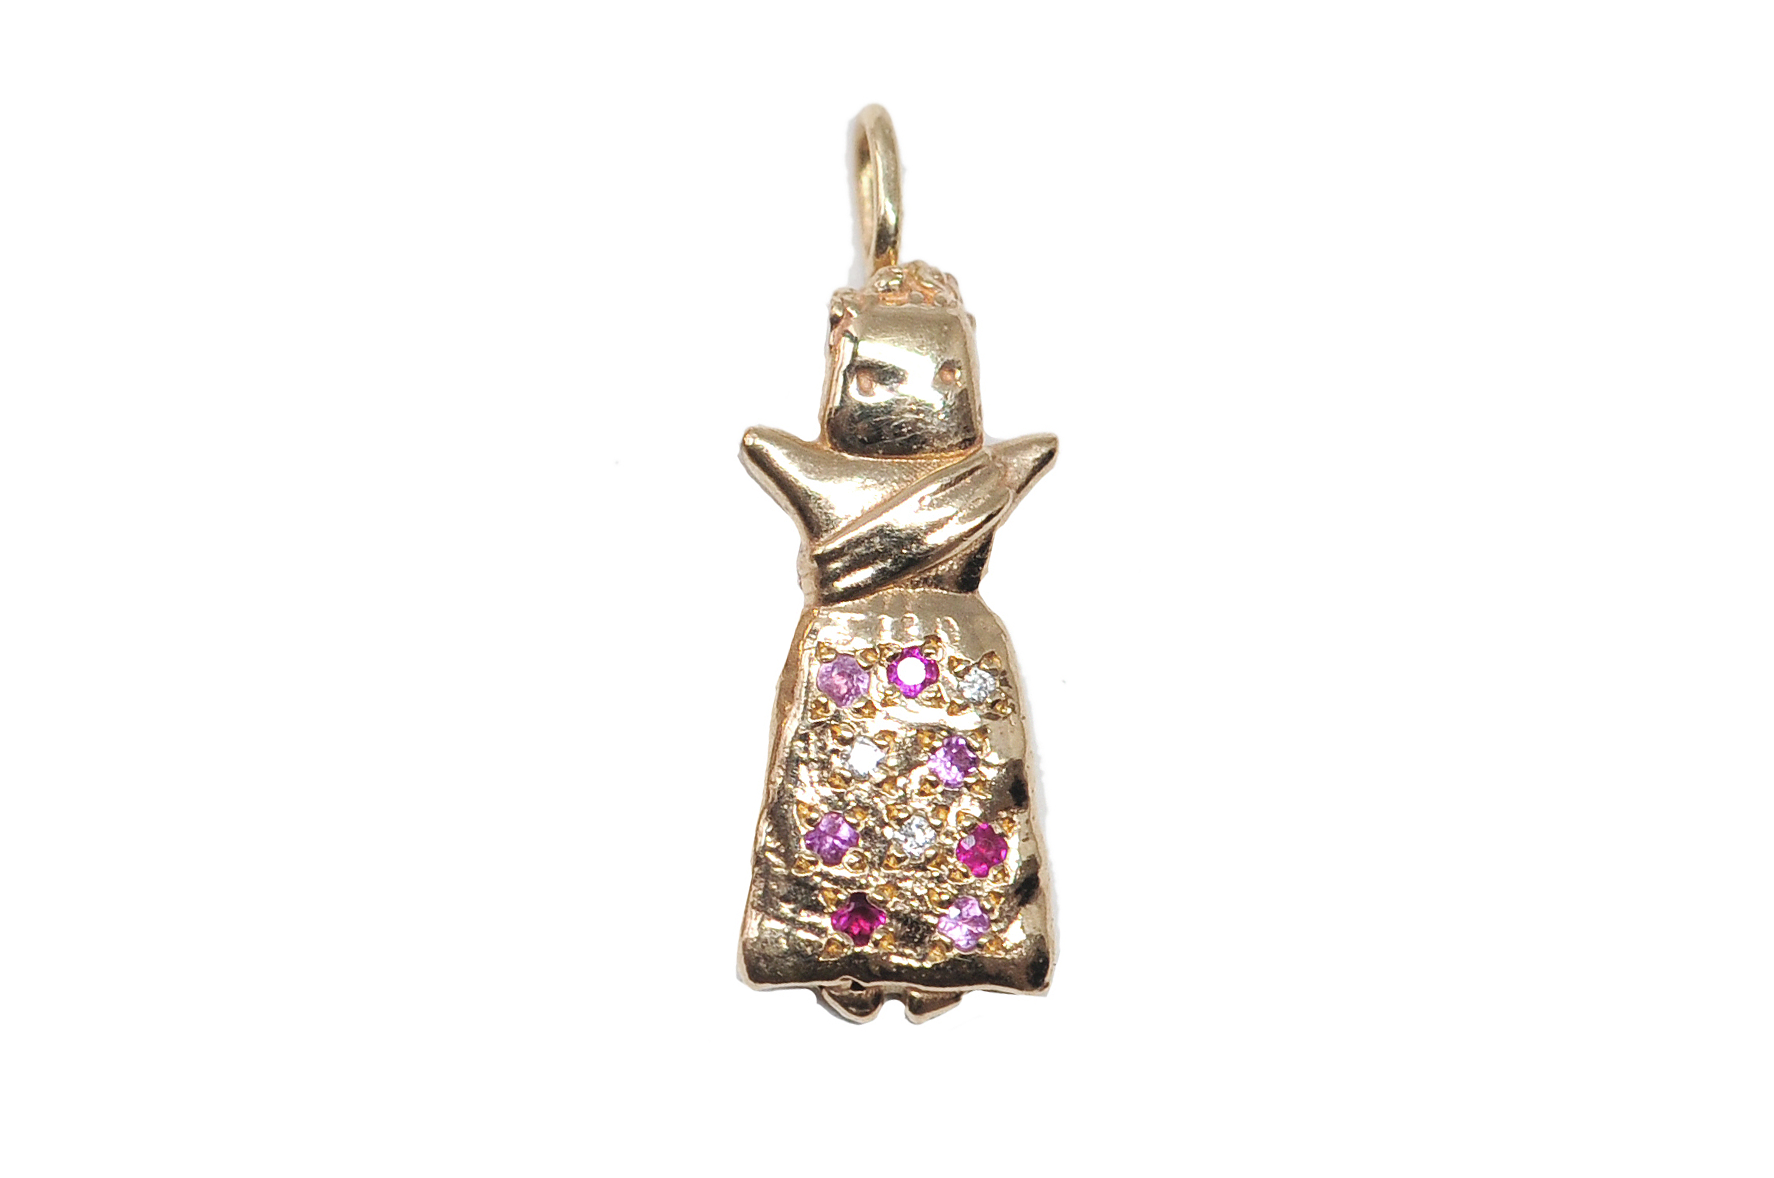 9ct Yellow Gold Multi-coloured CZ Articulated Rag Doll Charm Pendant | eBay